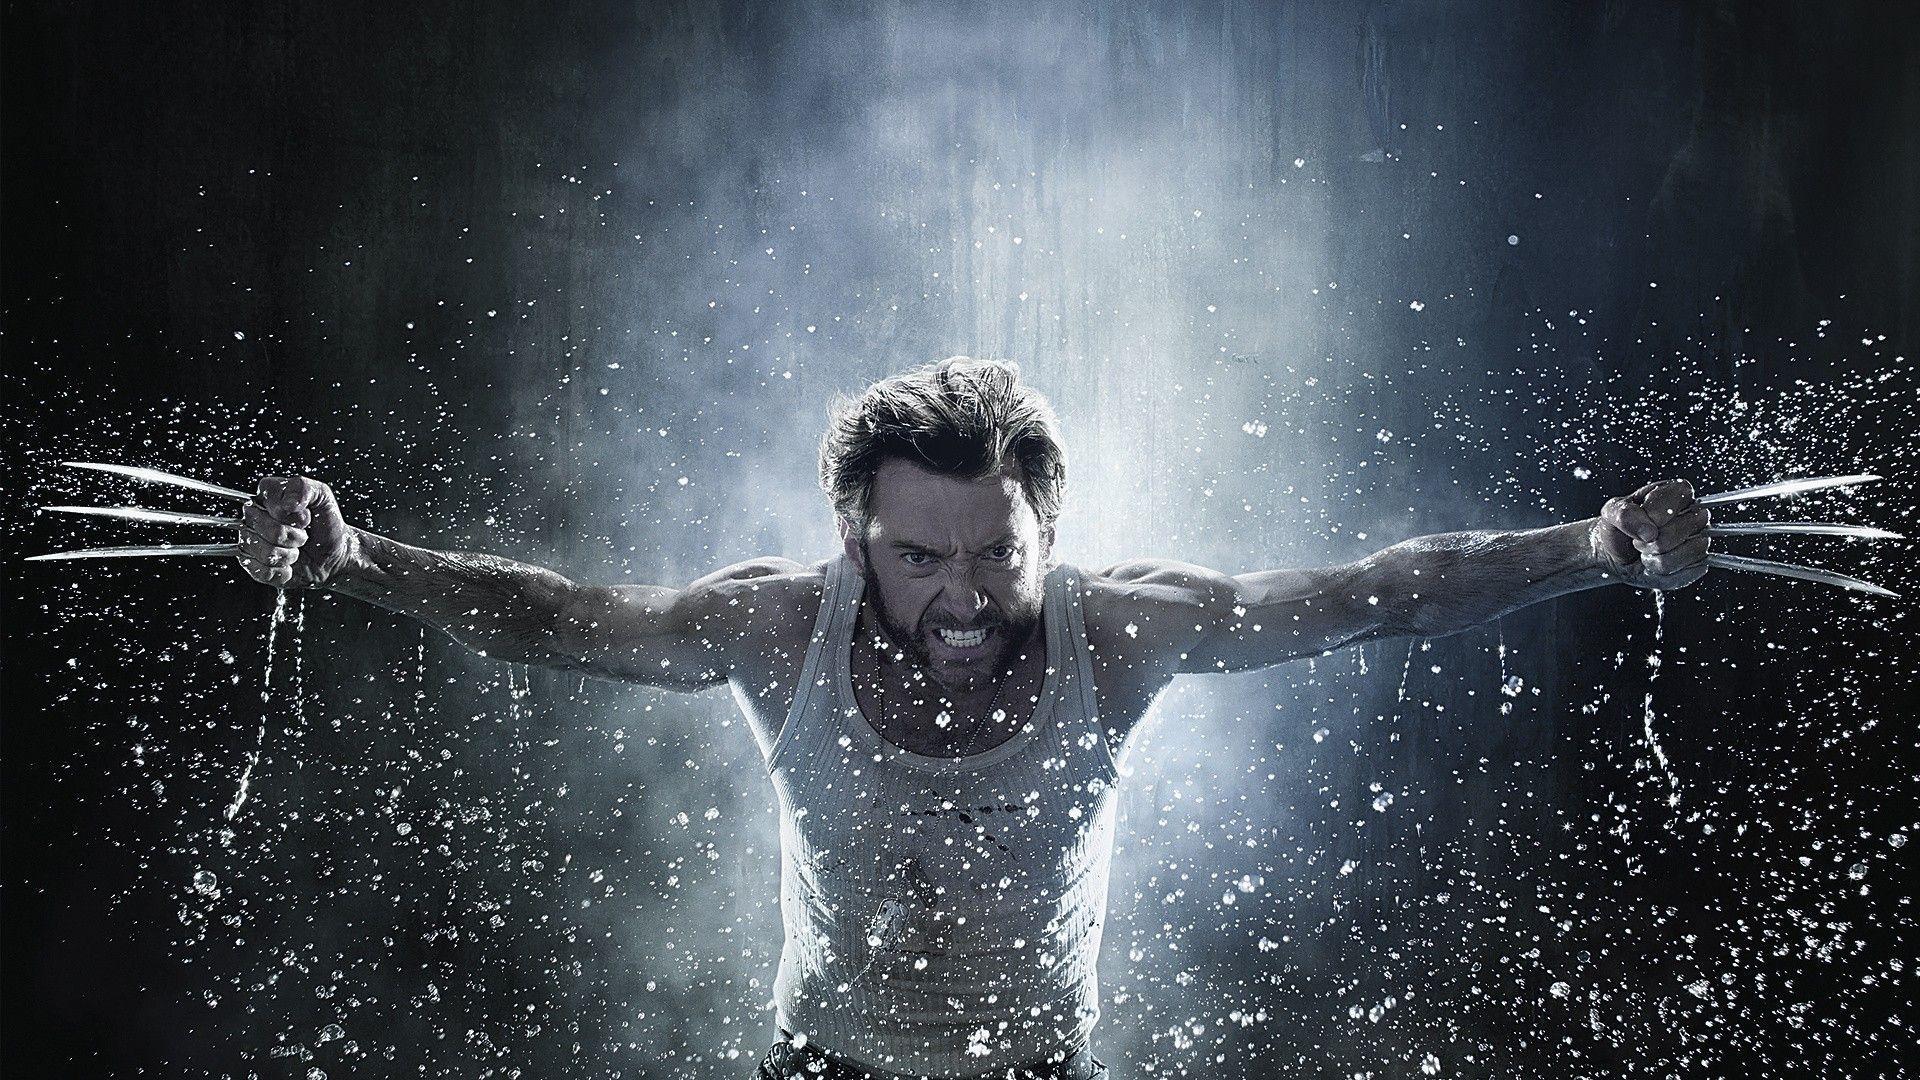 HD wolverine wallpapers hd / Wallpapers Database